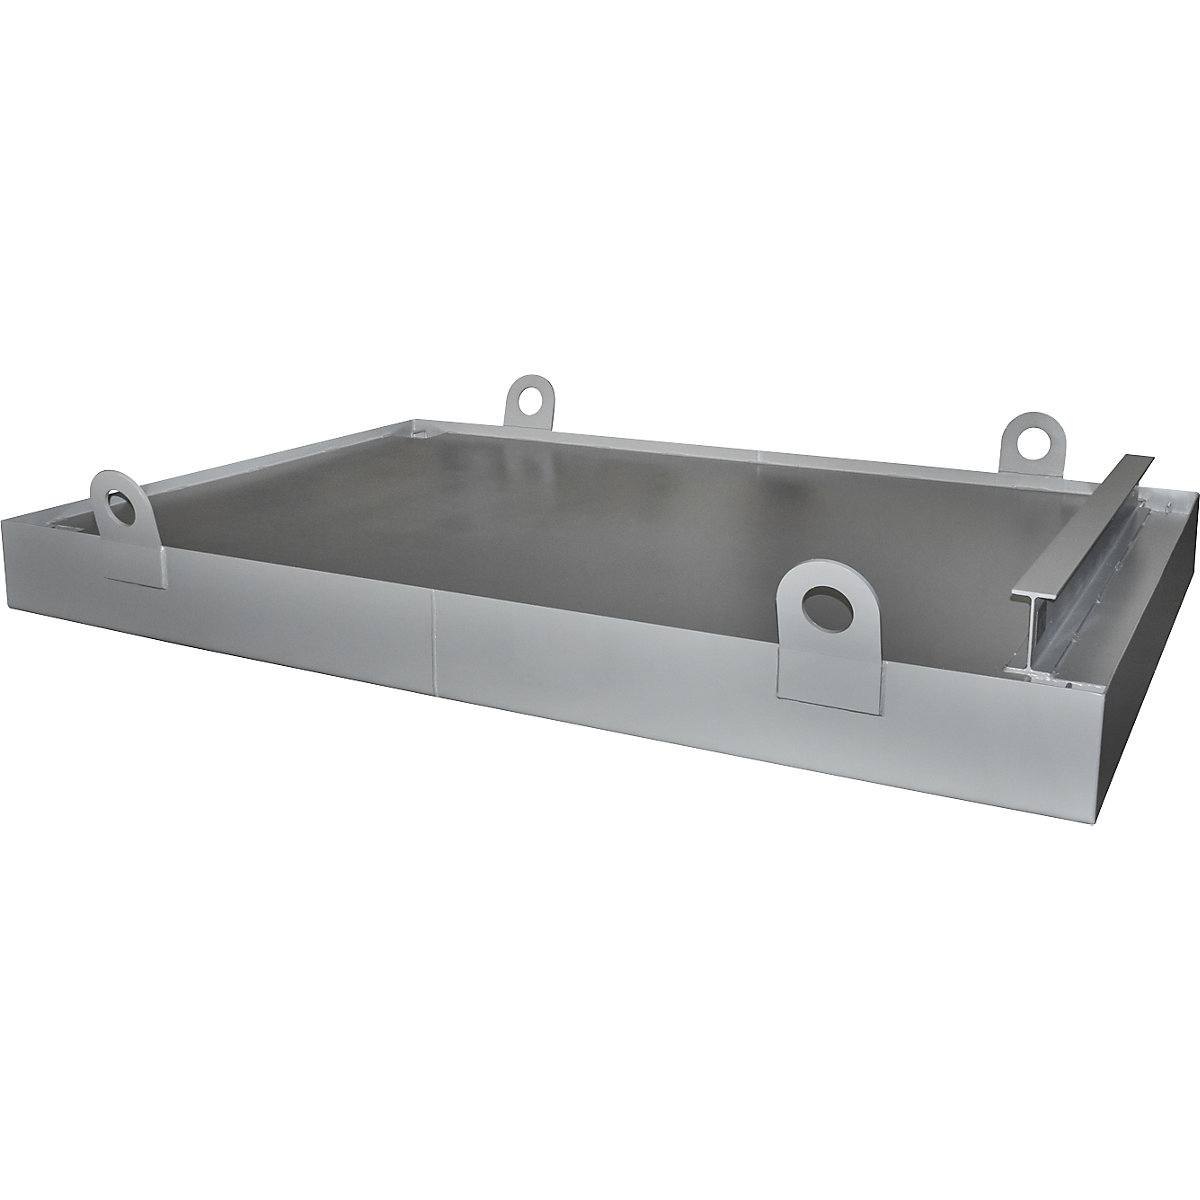 Sump tray for skip trailer – eurokraft pro, for skip trailers, sump capacity 1078 l, grey-11